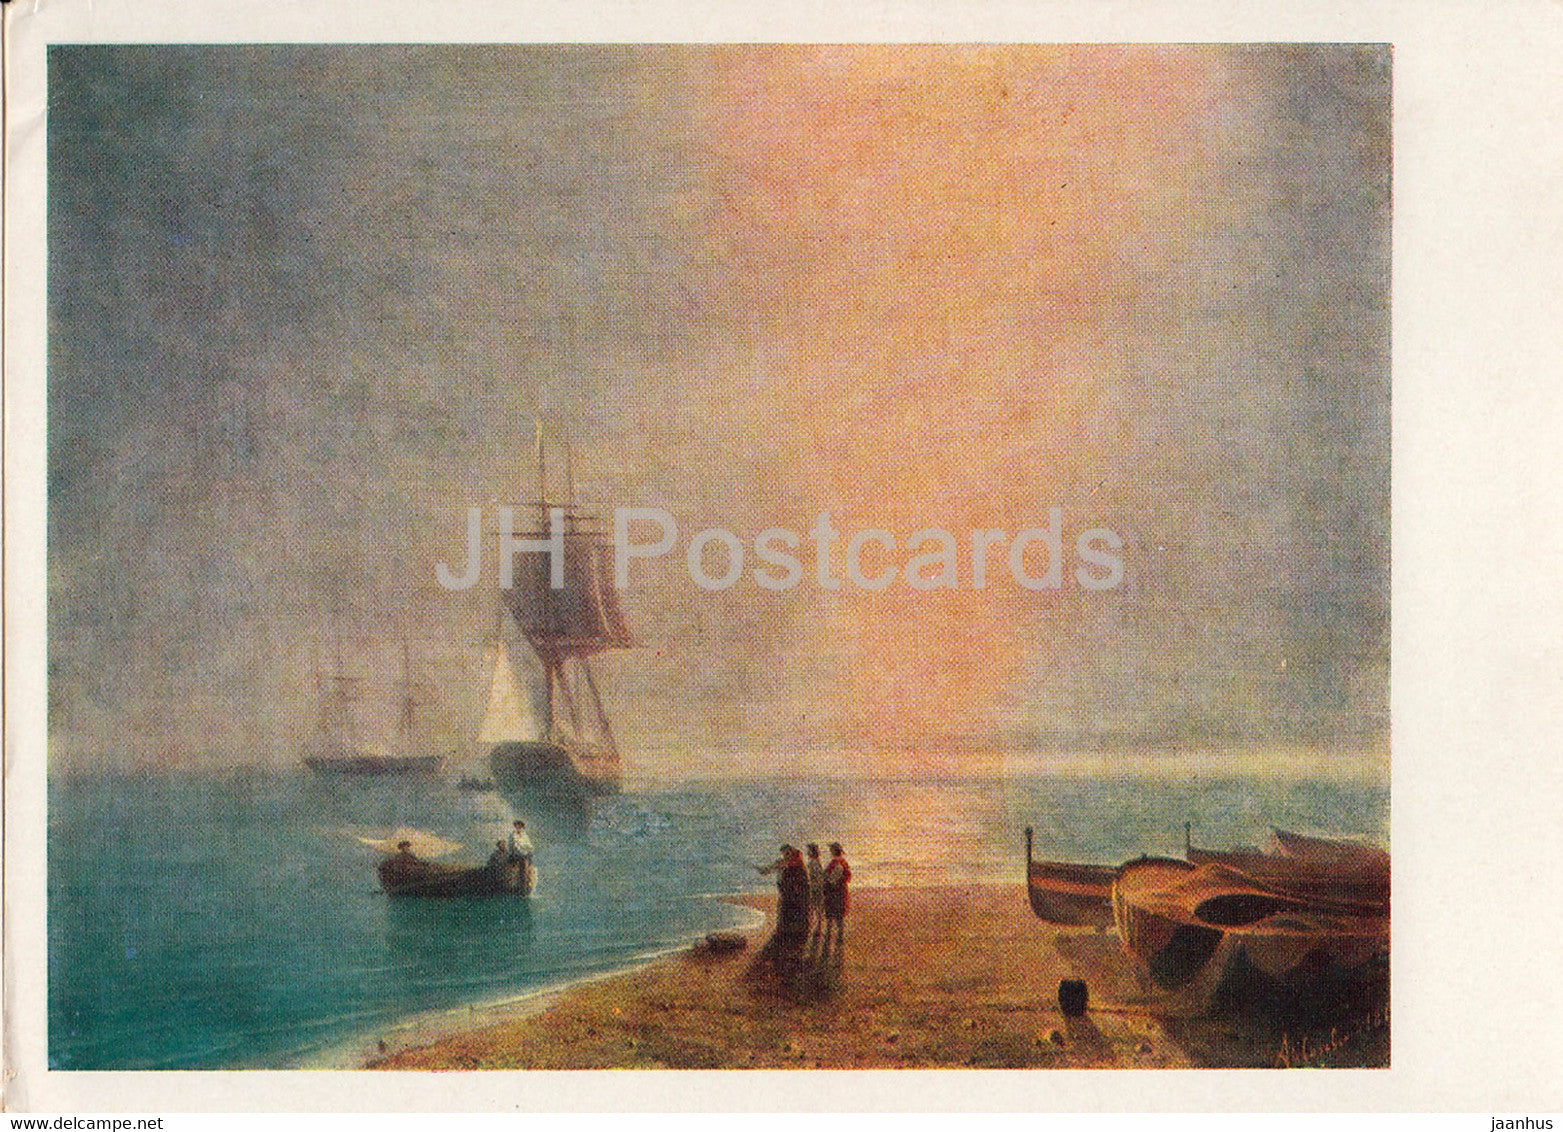 painting by Ivan Aivazovsky - Sea View - sailing ship - Russian art - 1962 - Russia USSR - unused - JH Postcards